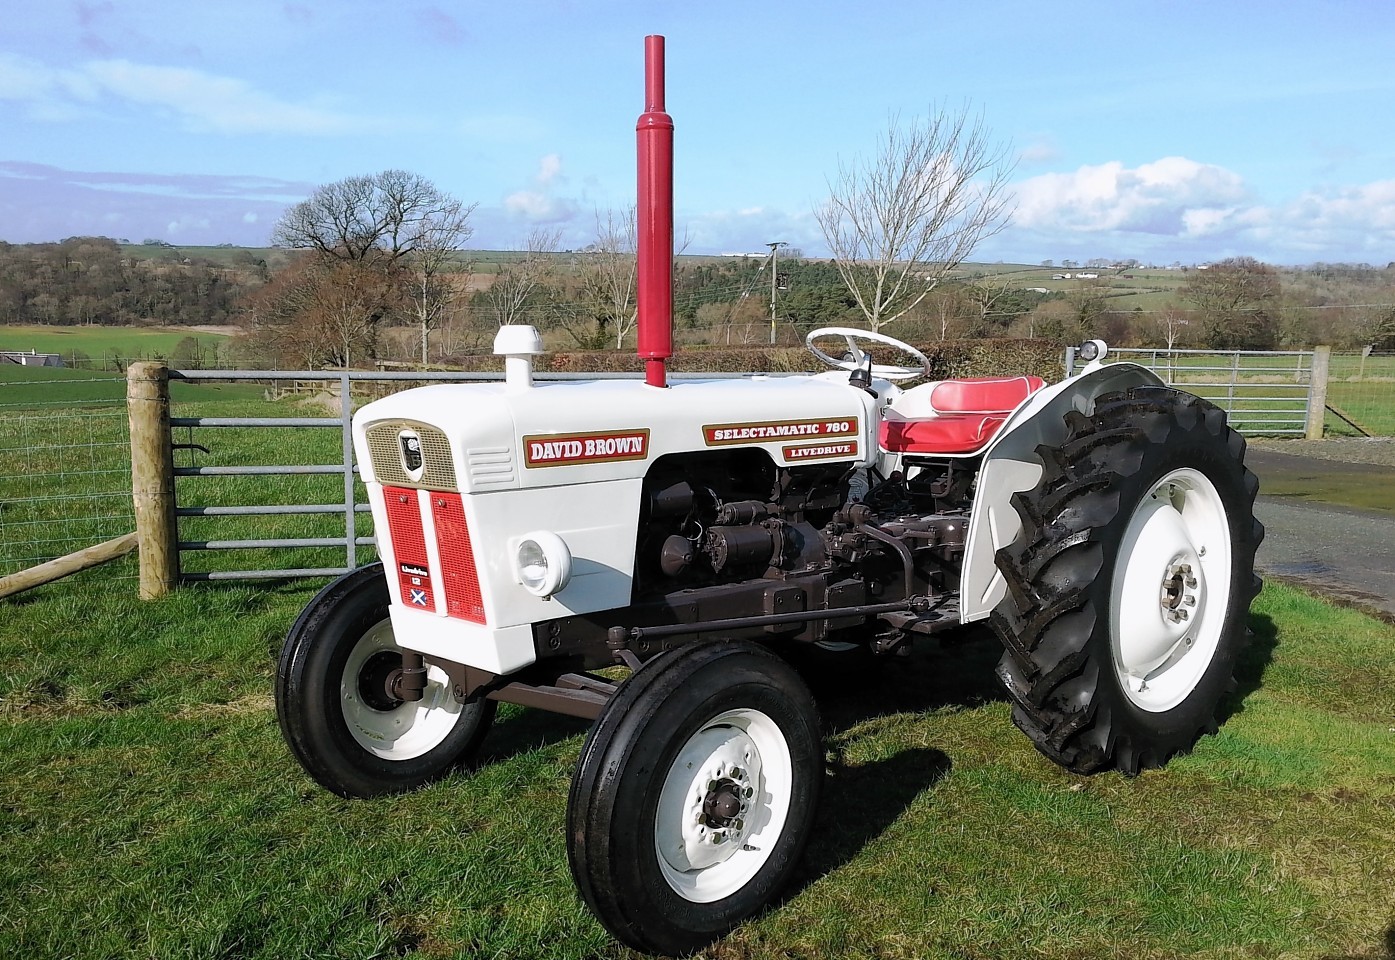 The 1971 David Baron 780 tractor being raffled by RSABI.